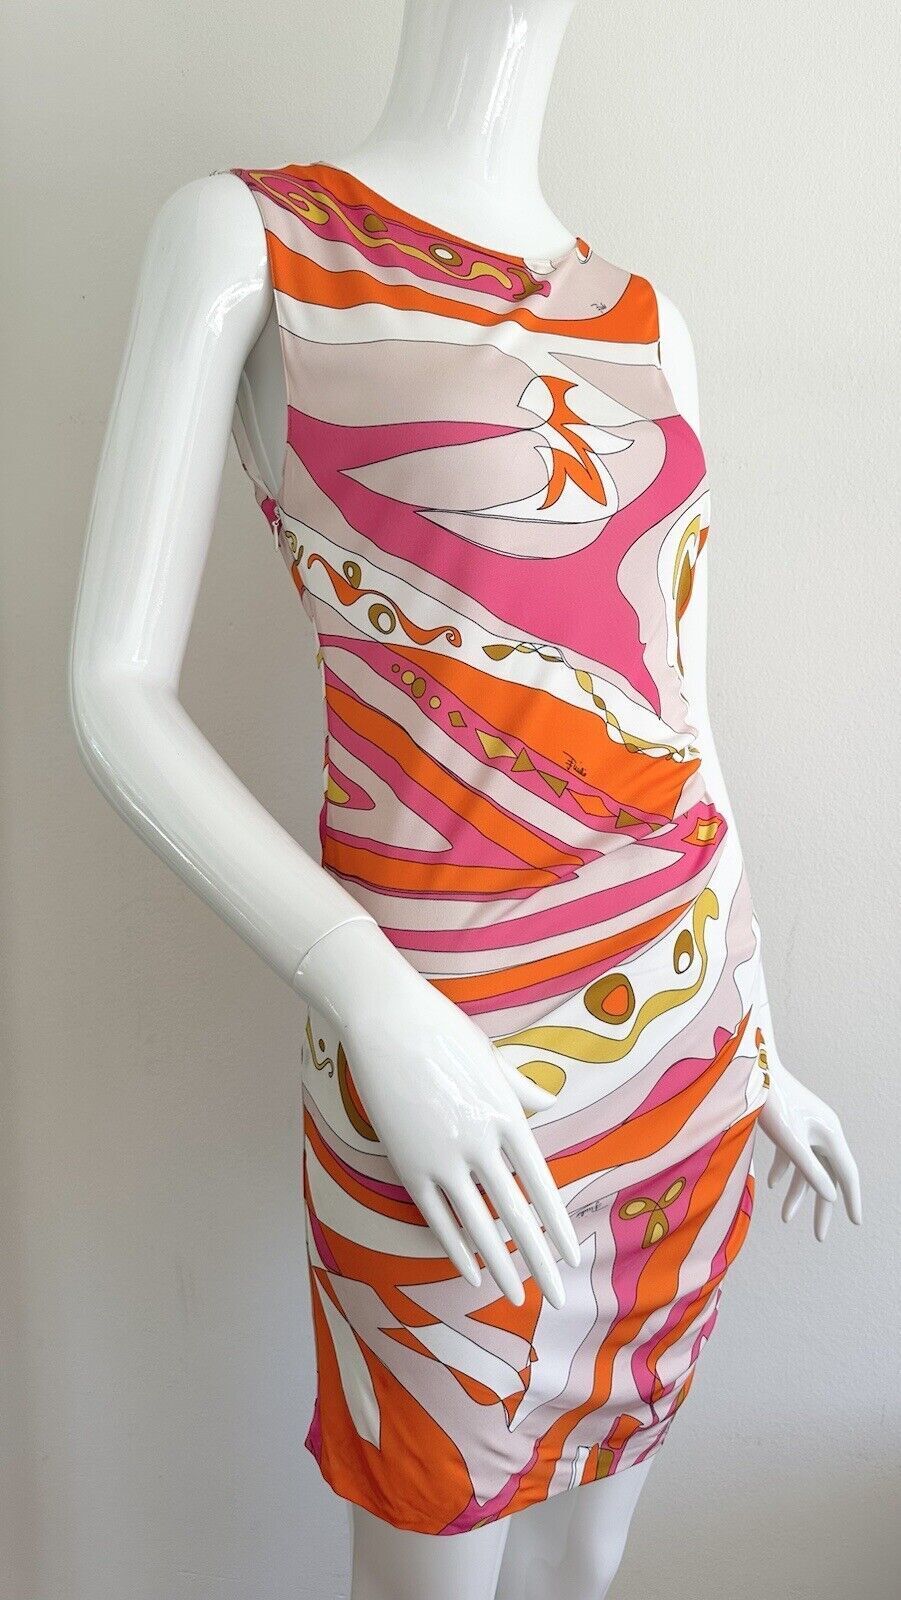 Emilio Pucci Dress White Pink Printed Cotton Silk Stretch Florence Size 42 S